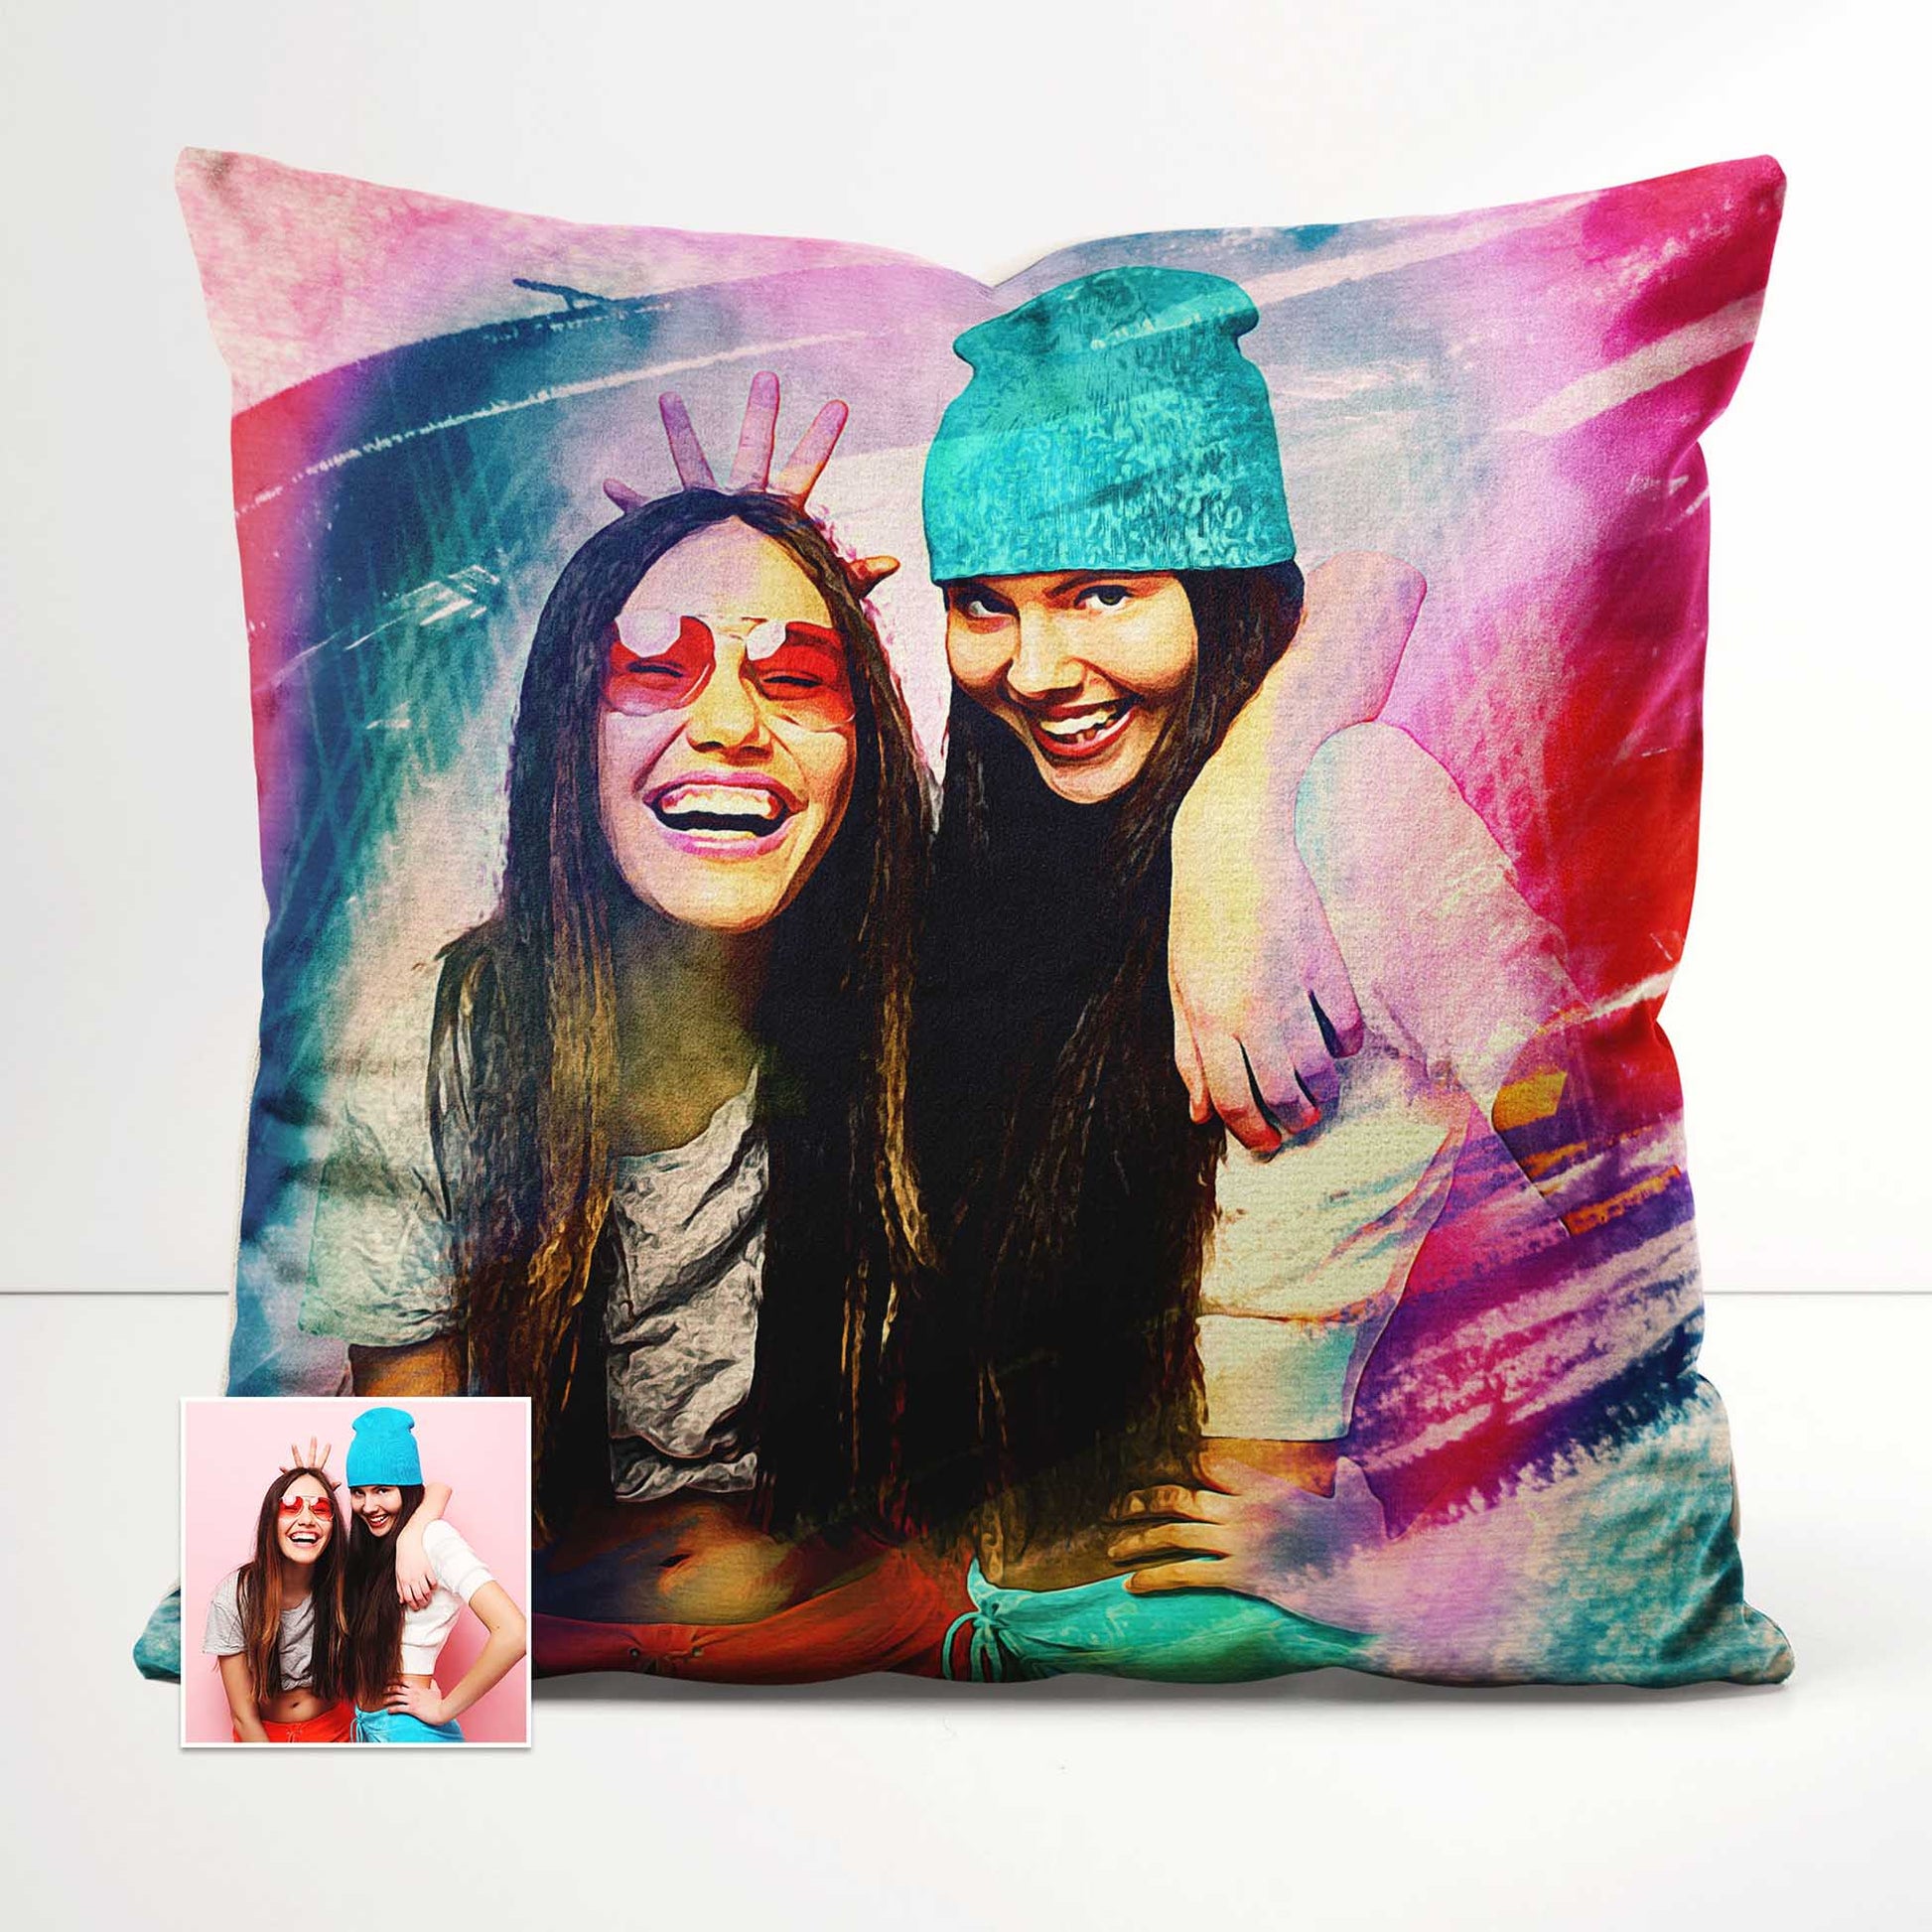 Express your creativity with the Personalised Artistic Brush Painting Cushion. Crafted from plush velvet fabric and printed with a design inspired by your photo, this handmade cushion is truly one-of-a-kind